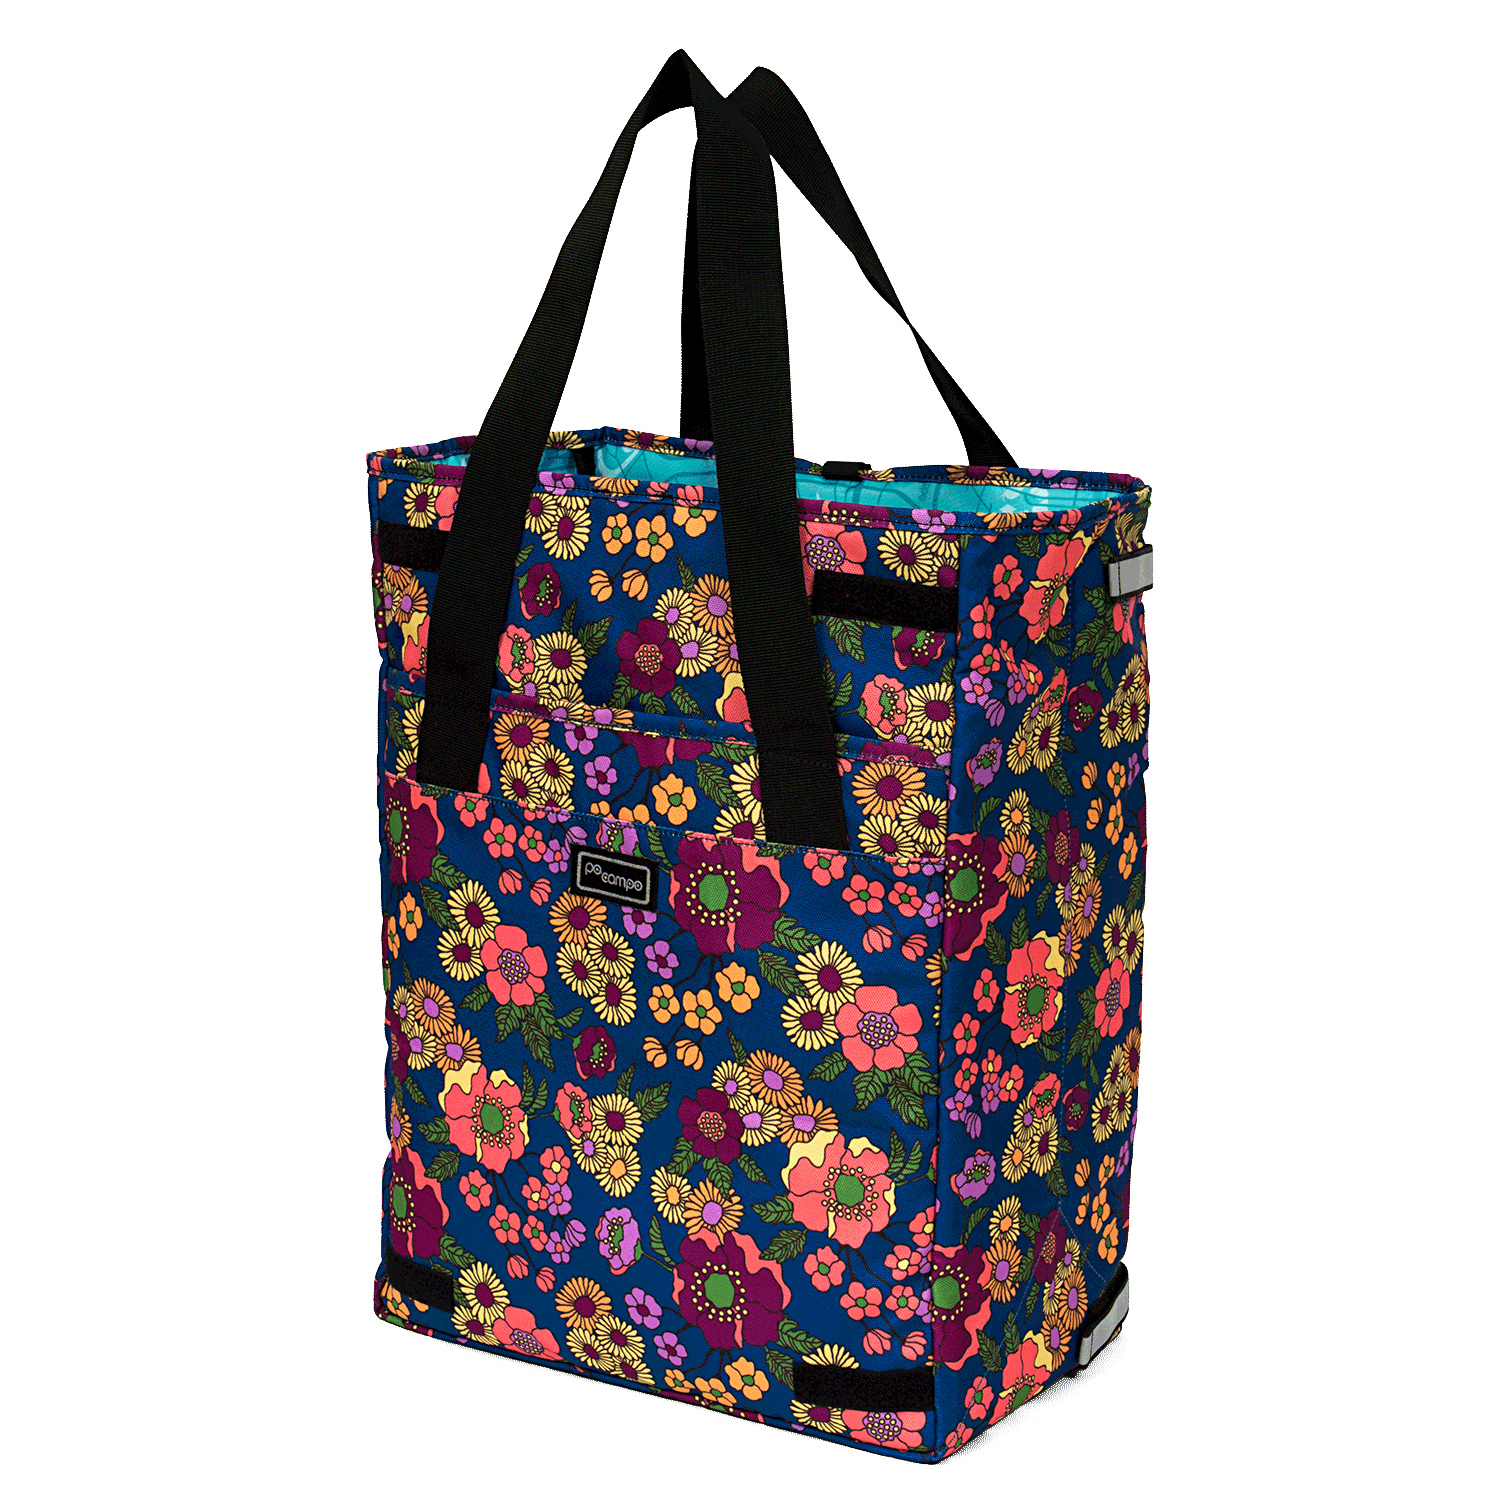 Orchard Grocery Pannier in Meadow - Po Campo color:meadow;